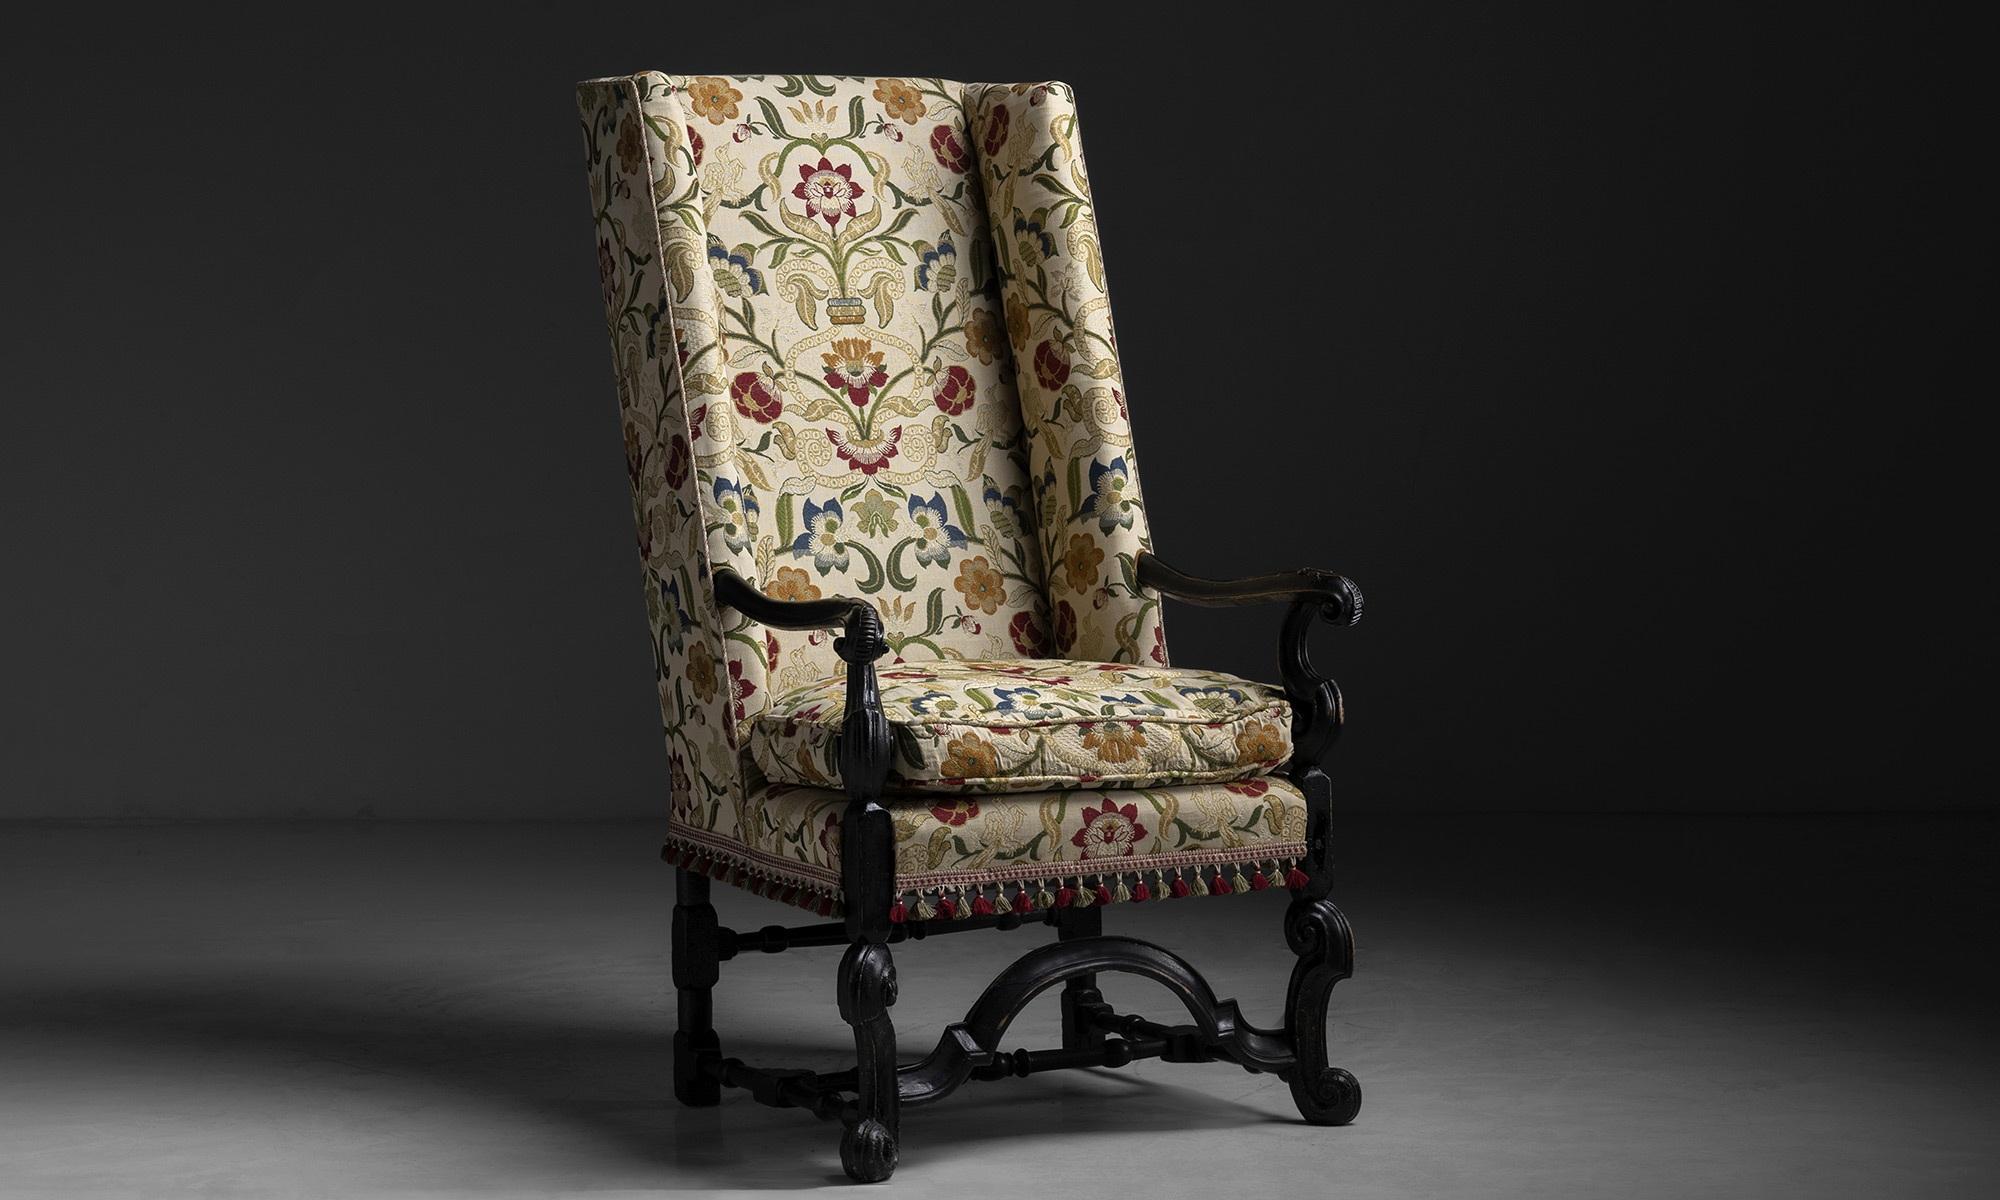 William & Mary wingback chair

England circa 1910

Carved frame with original floral upholstery.

Measures: 28